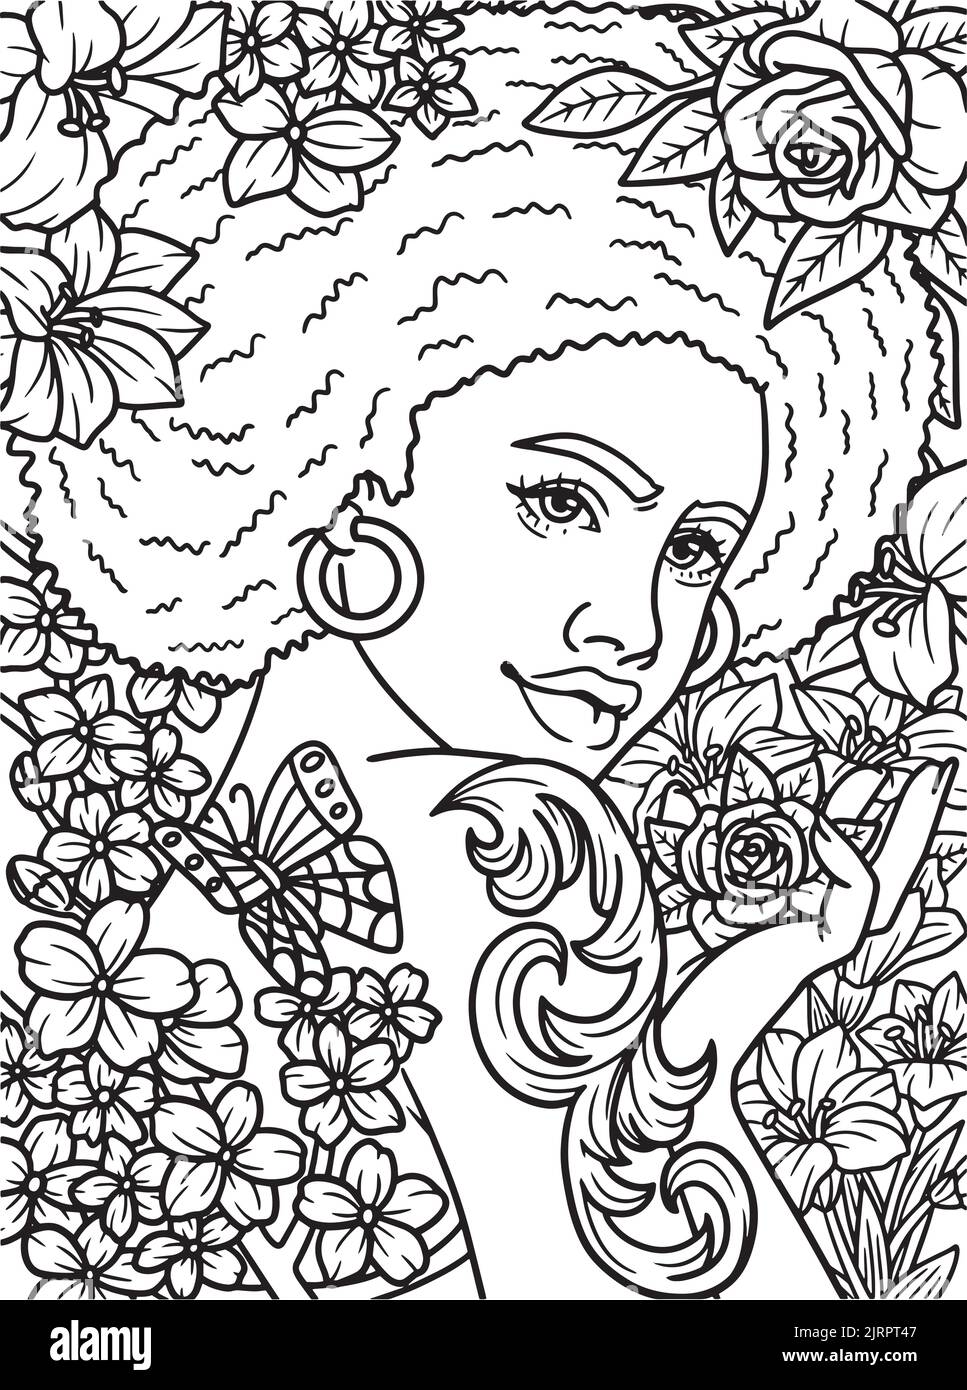 Afro American Girl Butterfly Coloring Page Stock Vector Image & Art - Alamy